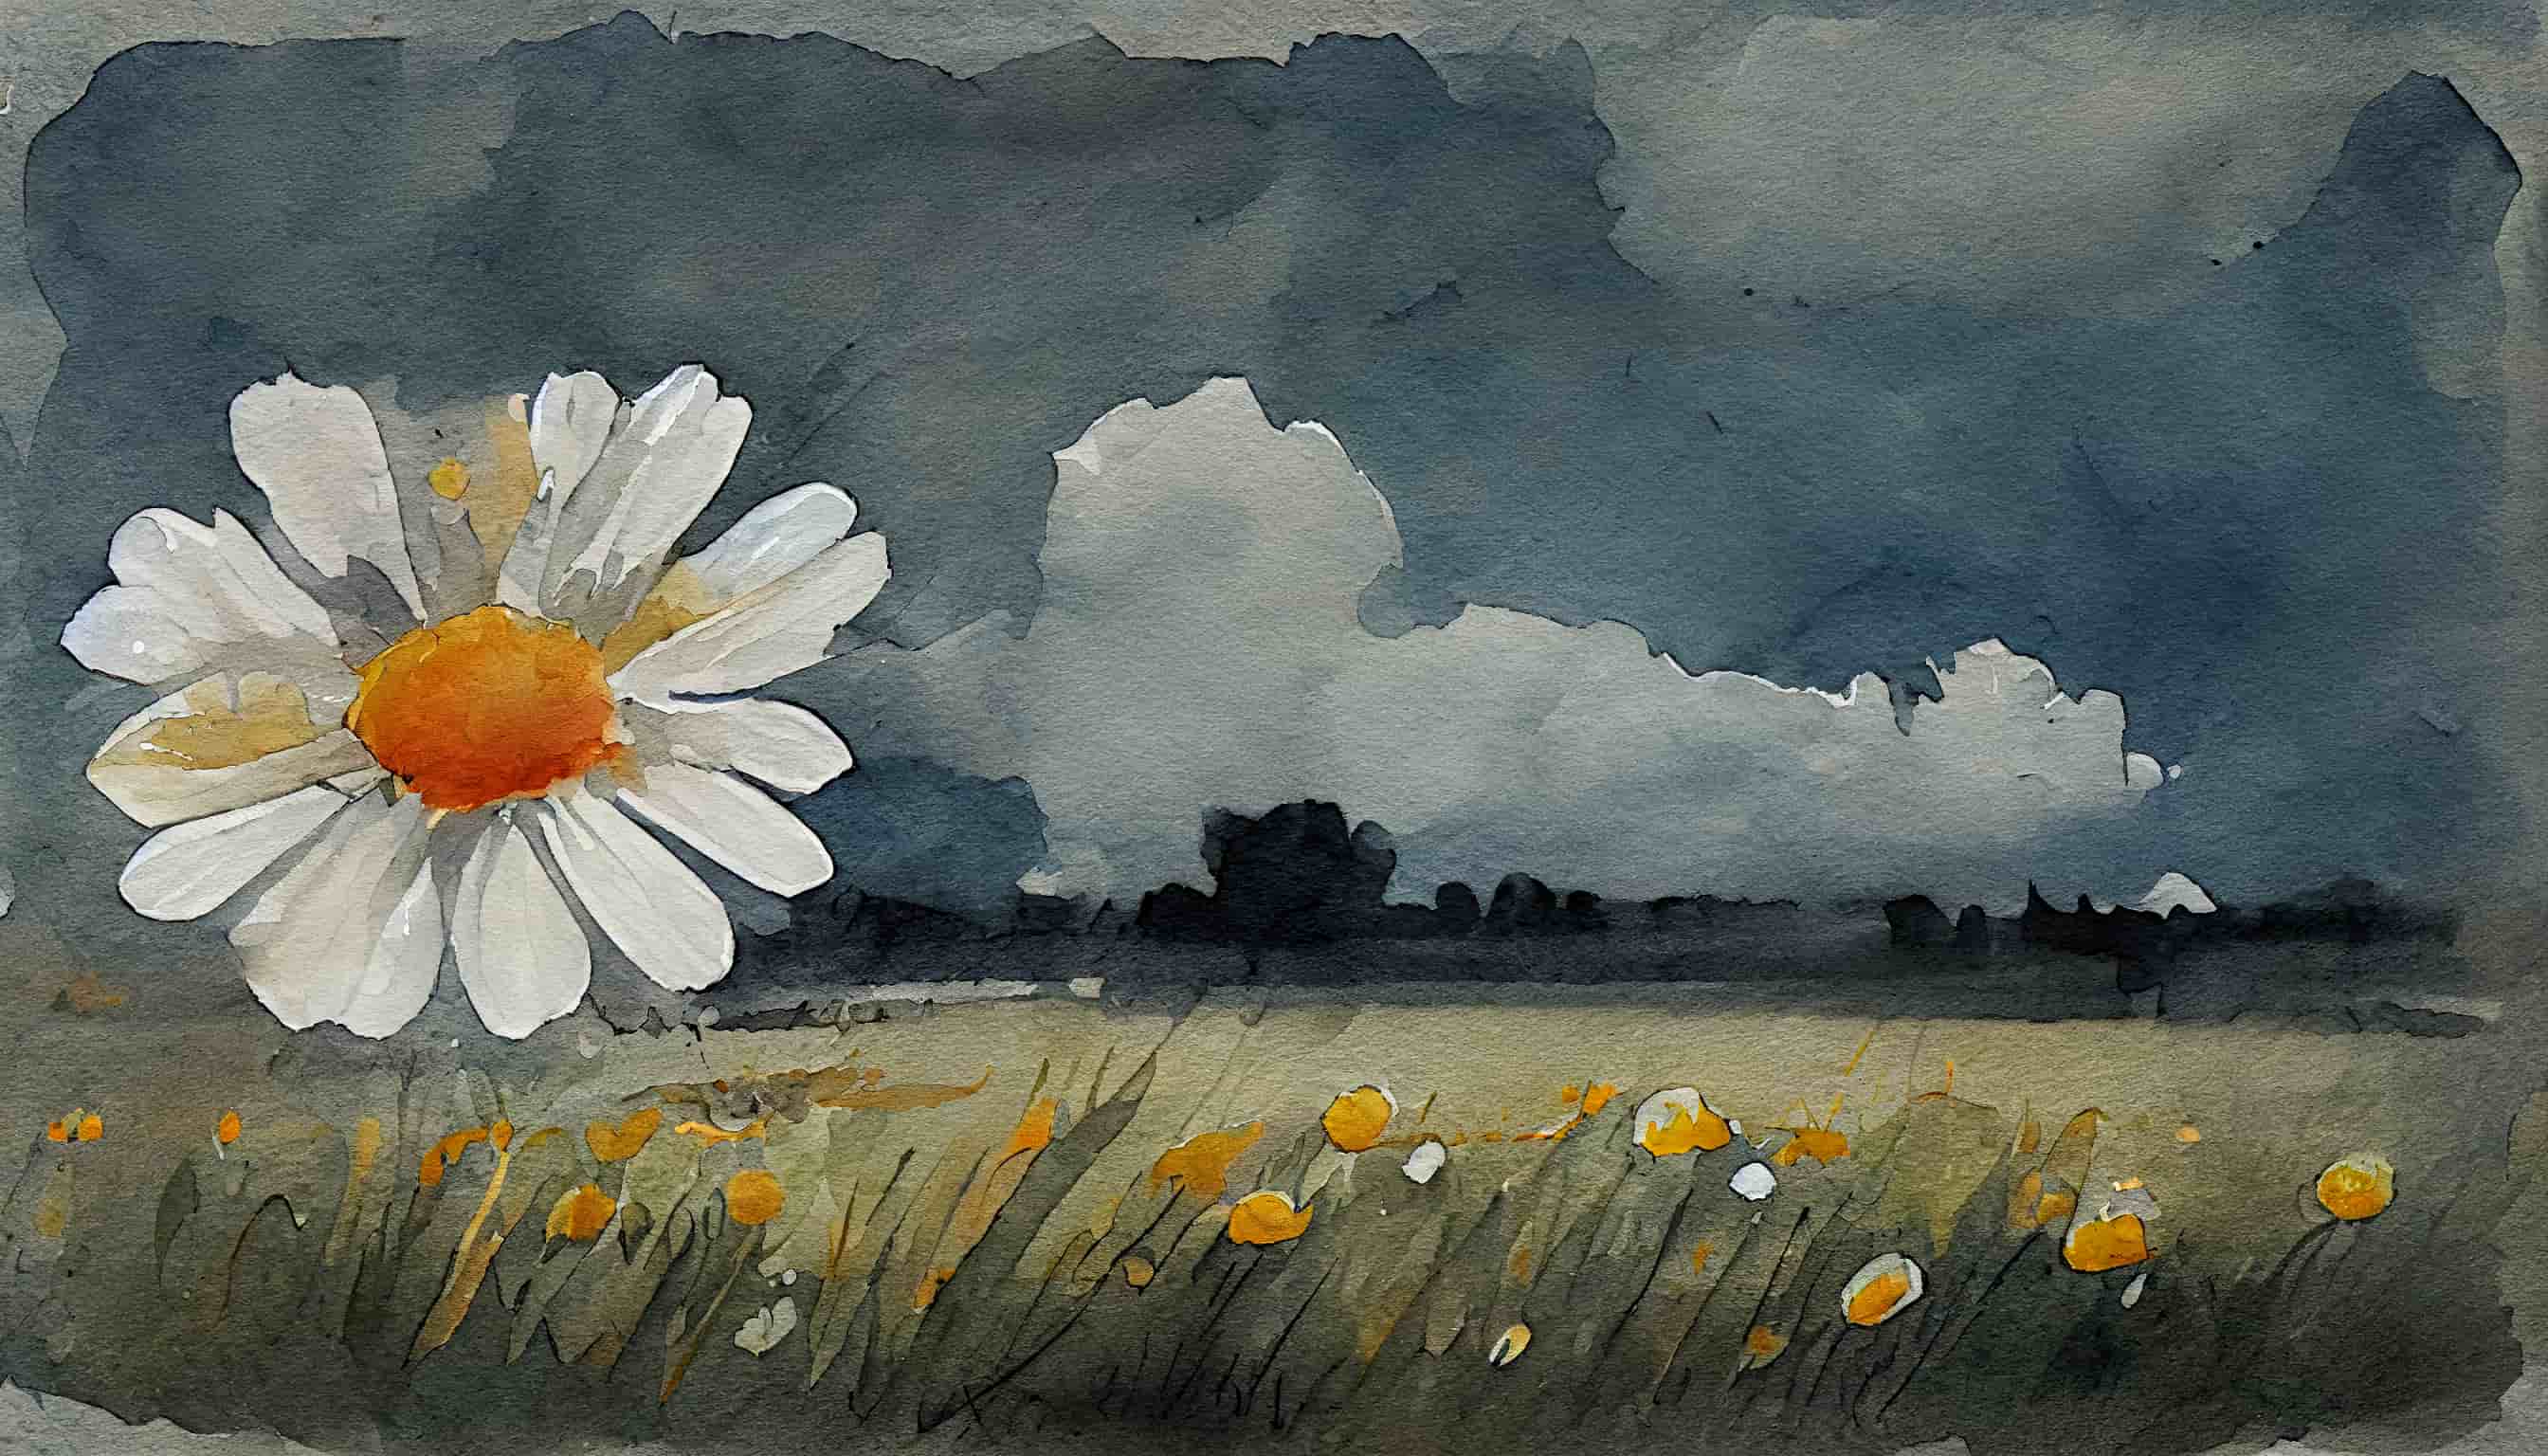 watercolor a single daisy in a field with gray clouds in the background